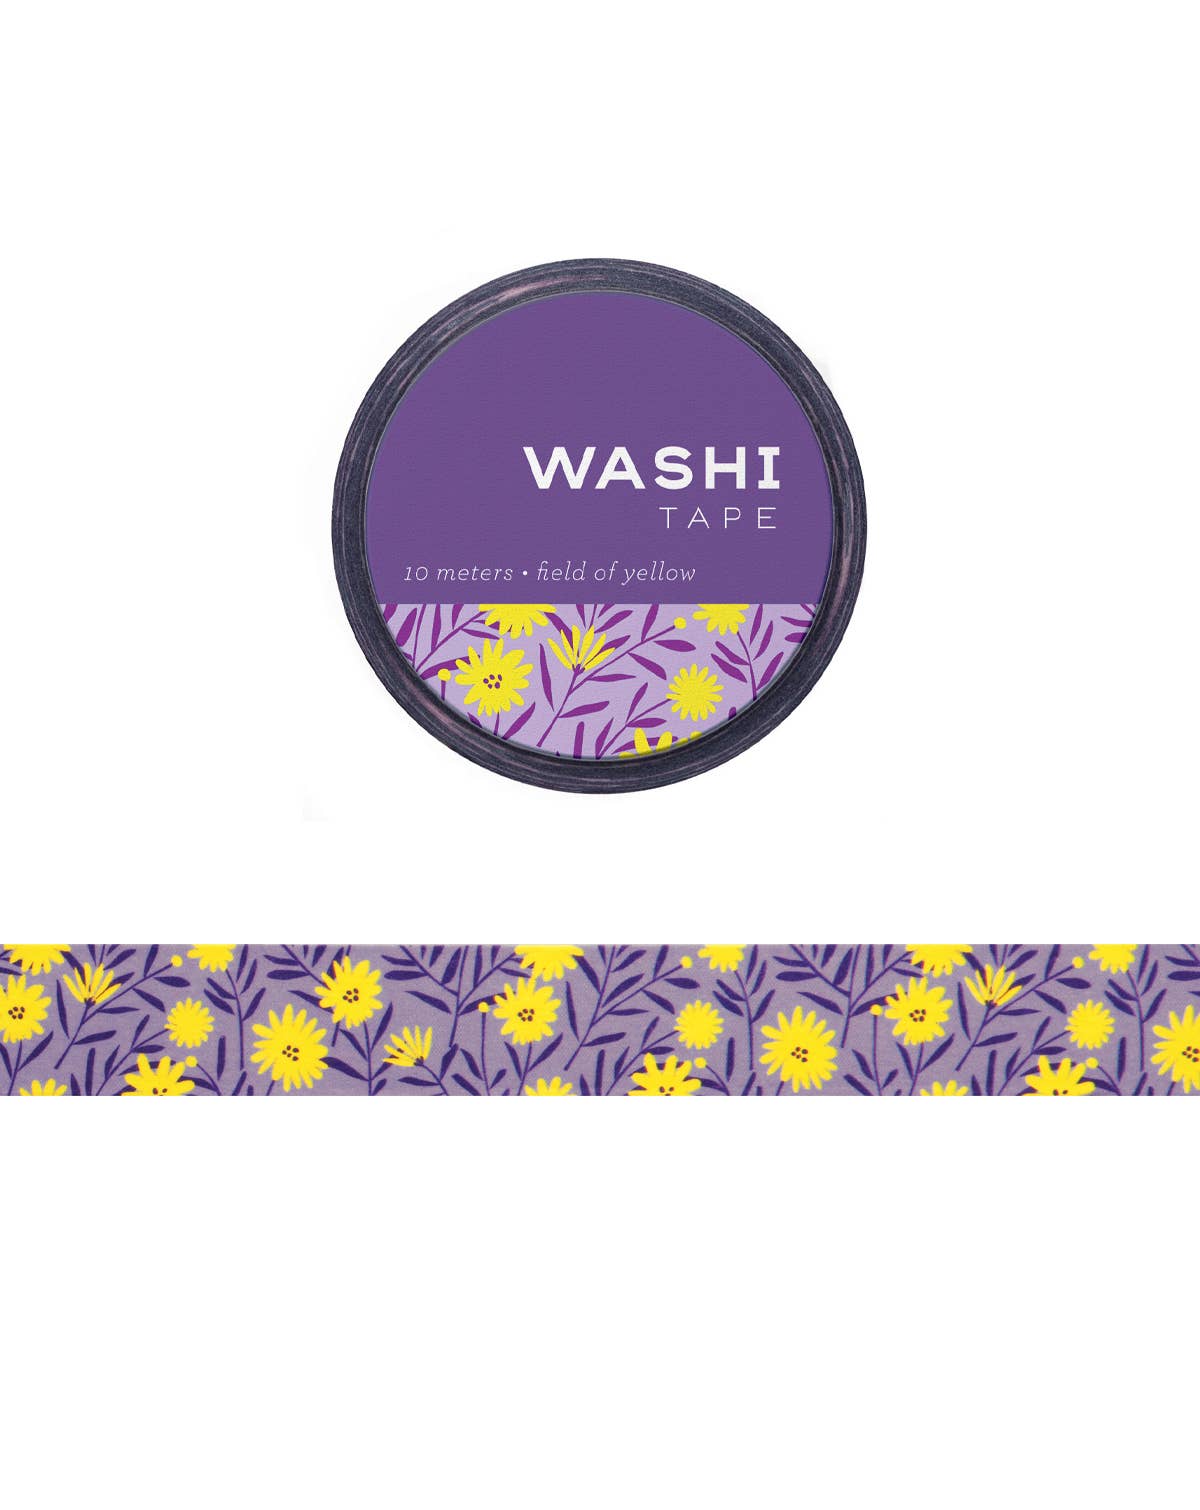 Washi Tape Field of Yellow Washi Tape - Paws Enrich Plan - Dog, Puppy, Nature & Adventure Inspired Stationery